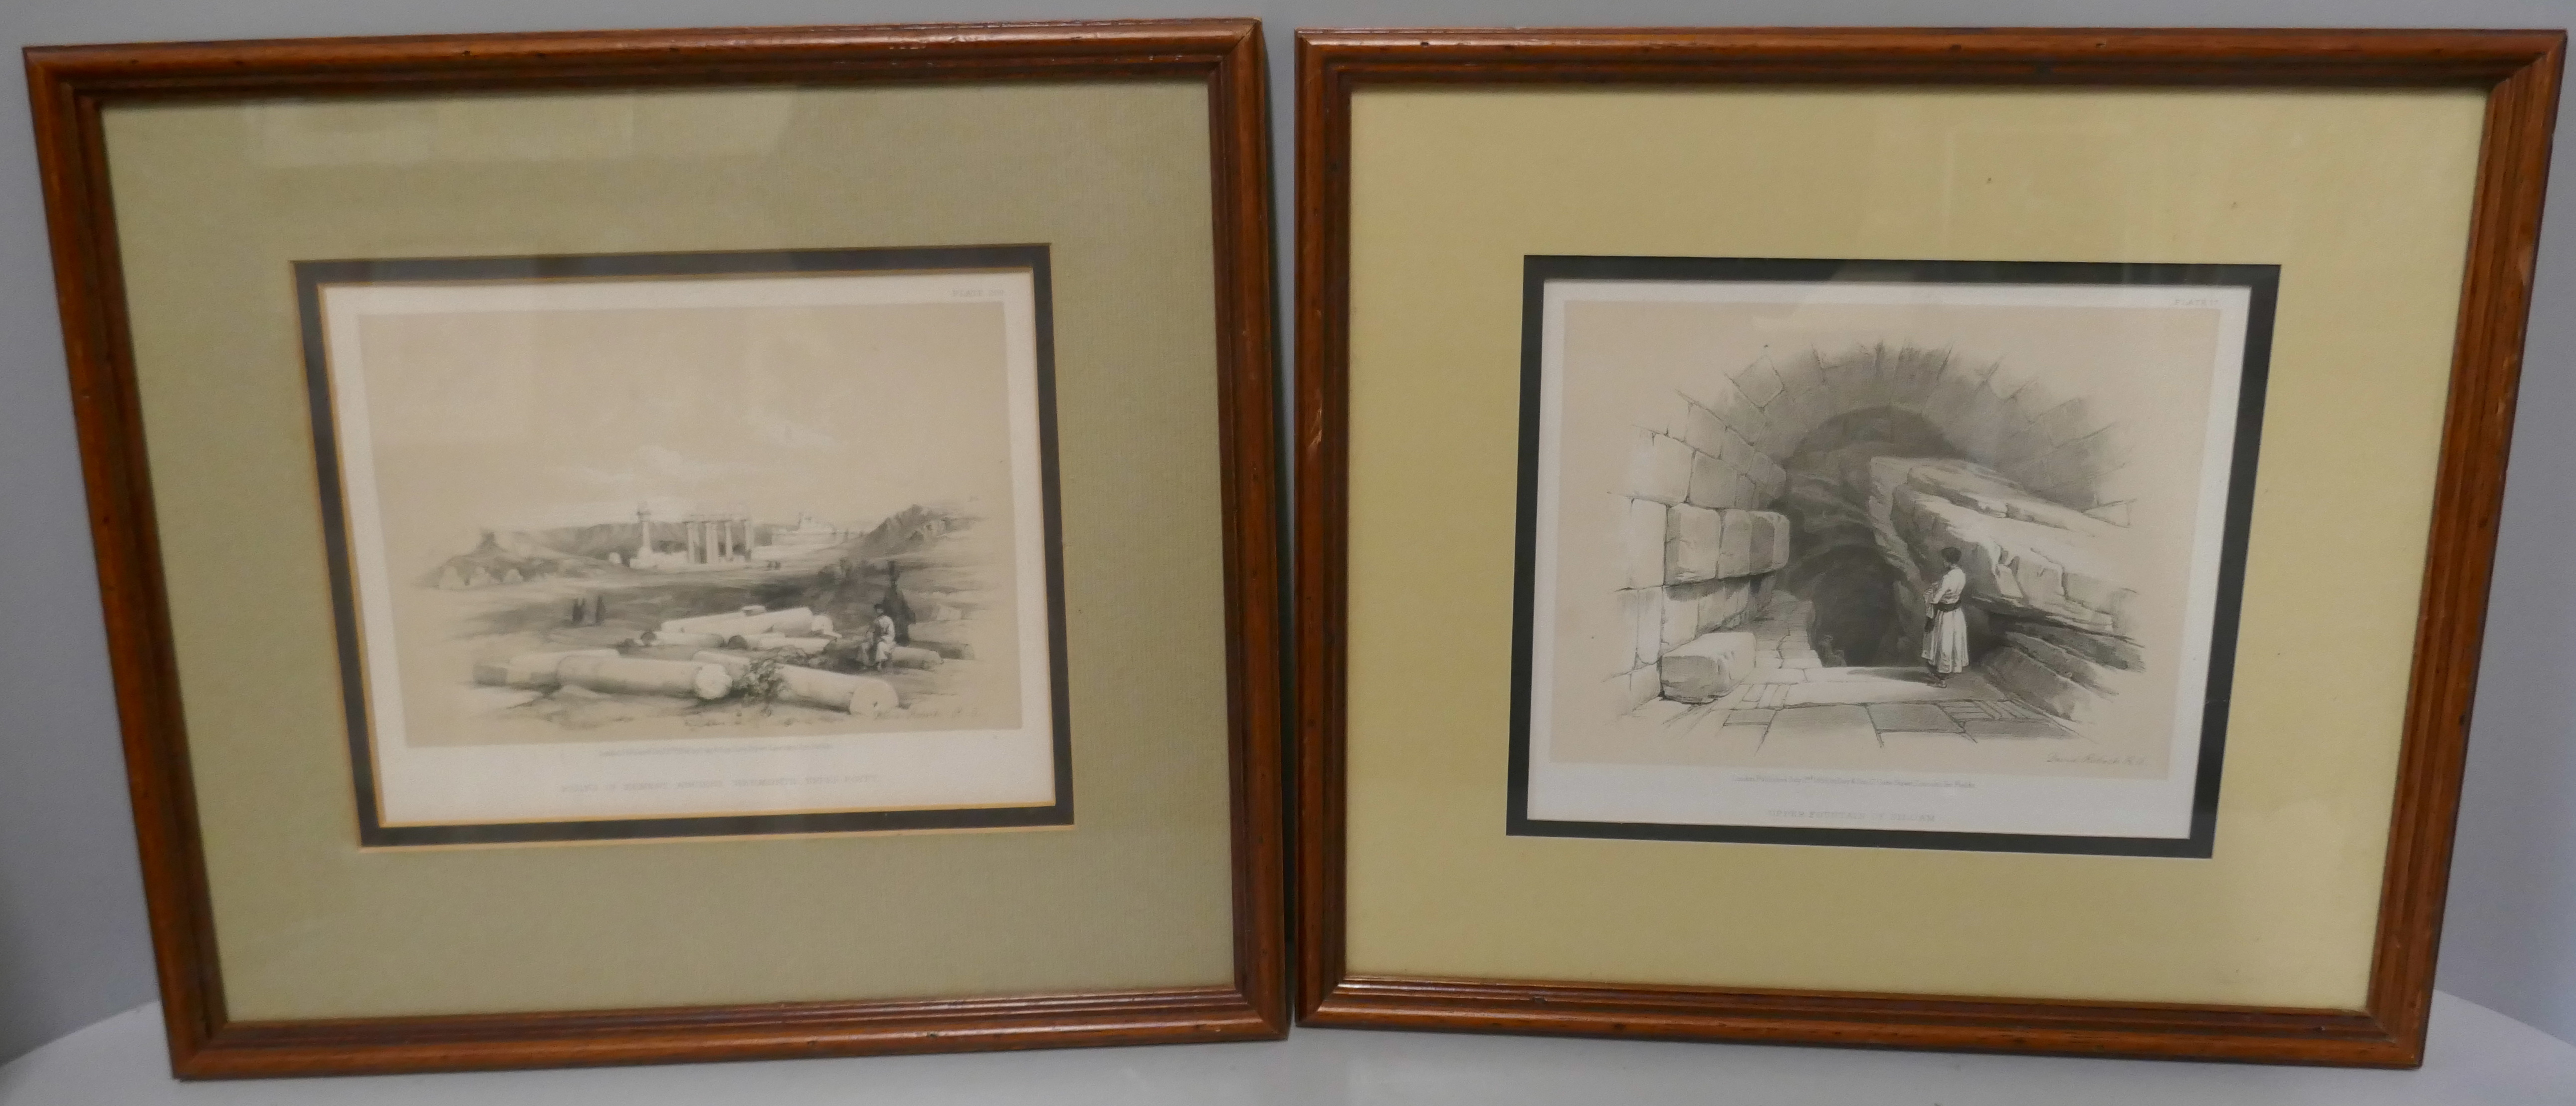 A collection of framed prints, all relating to ancient Egypt - Image 2 of 6